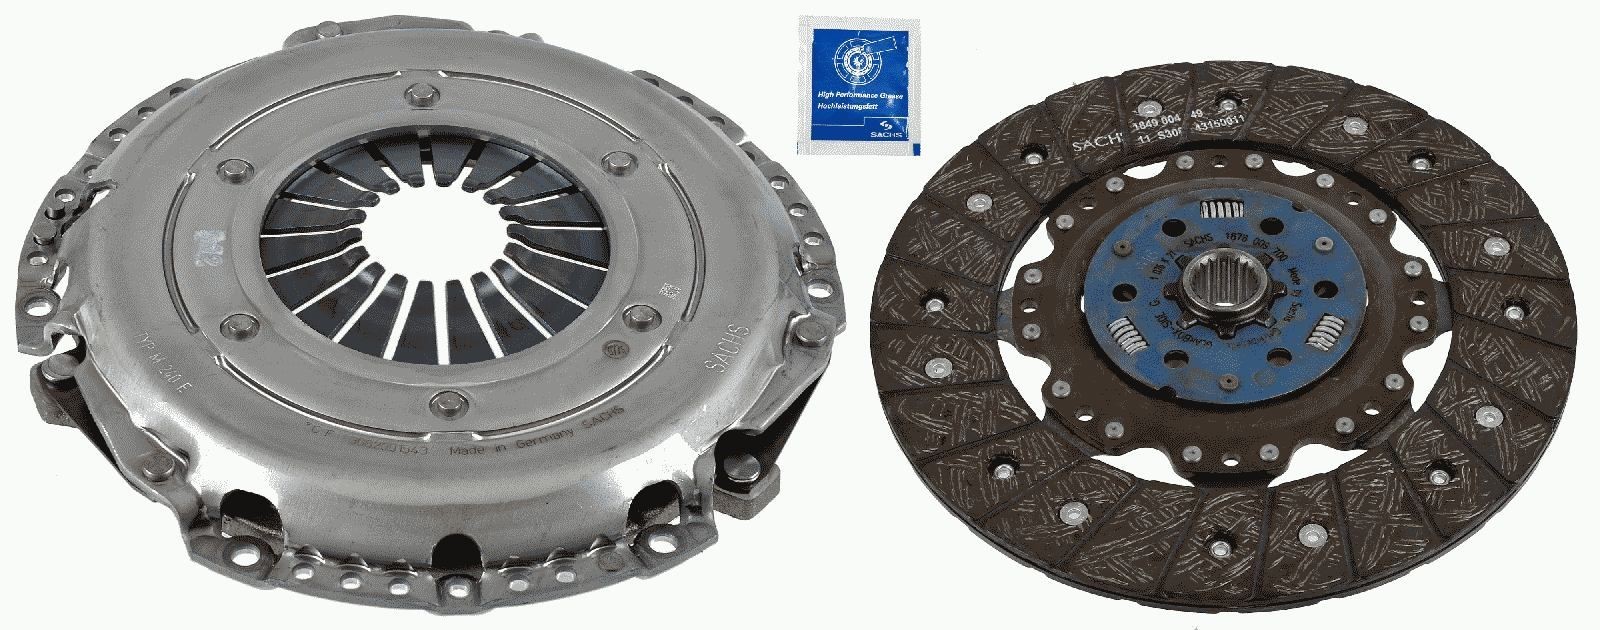 3000 970 143 SACHS Clutch set ALFA ROMEO without clutch release bearing, 240mm